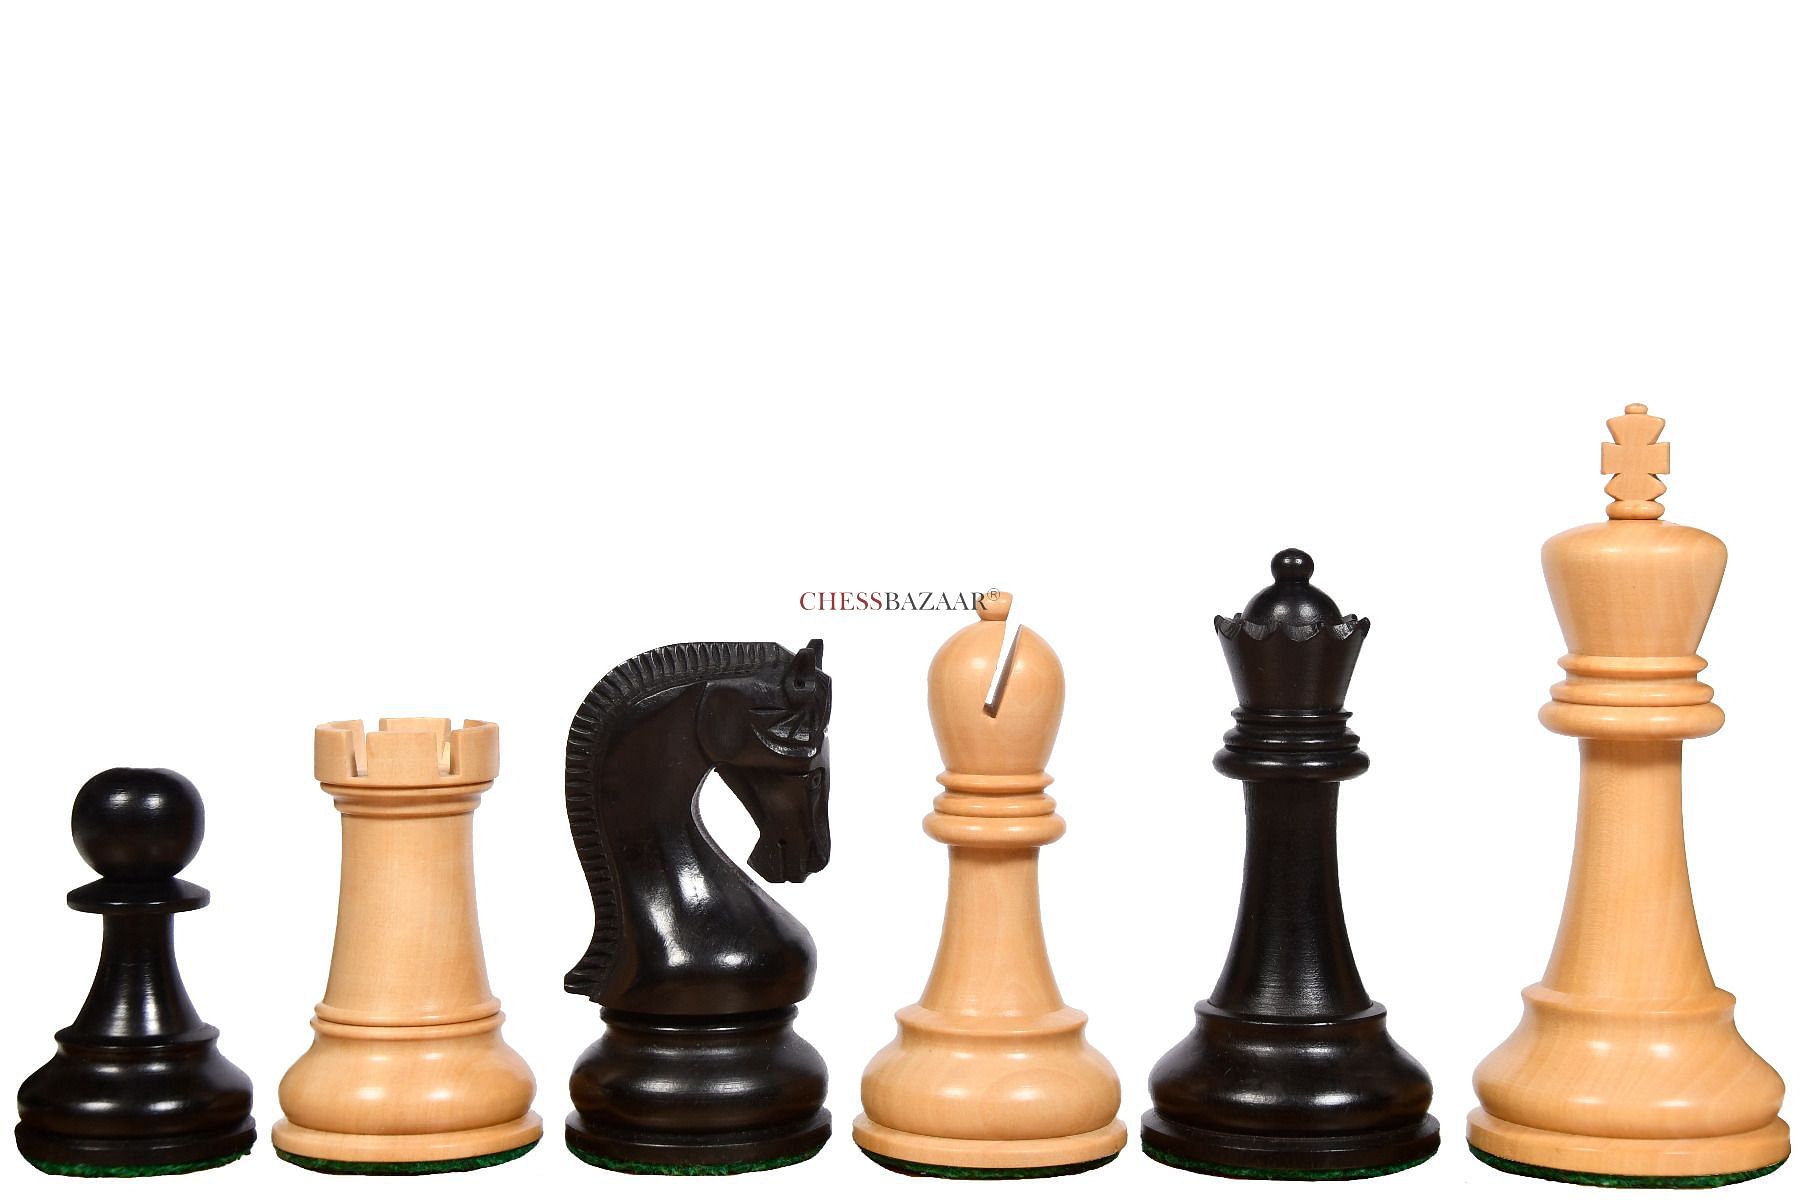 Buy The Leningrad Club-Sized Wooden Chess Pieces - 4.0